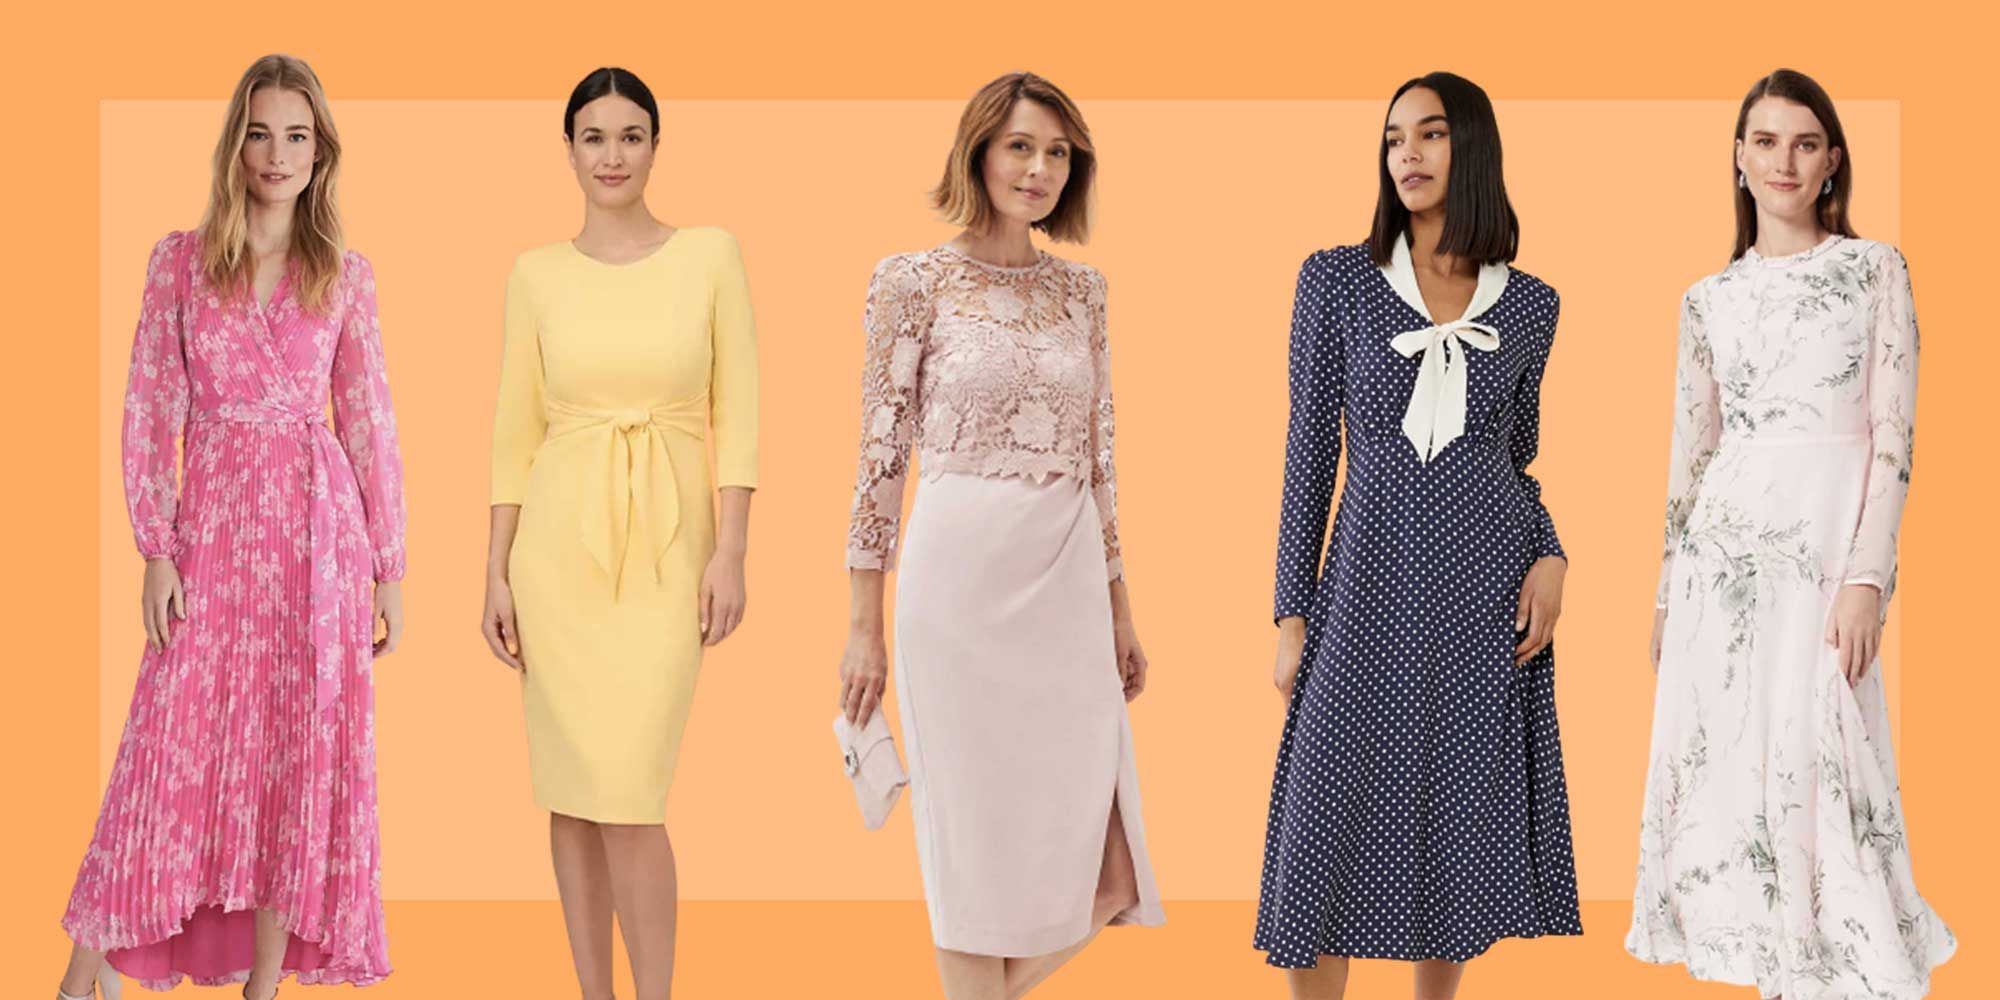 Stylish Mother of the Bride or Groom Outfits for Over 50's